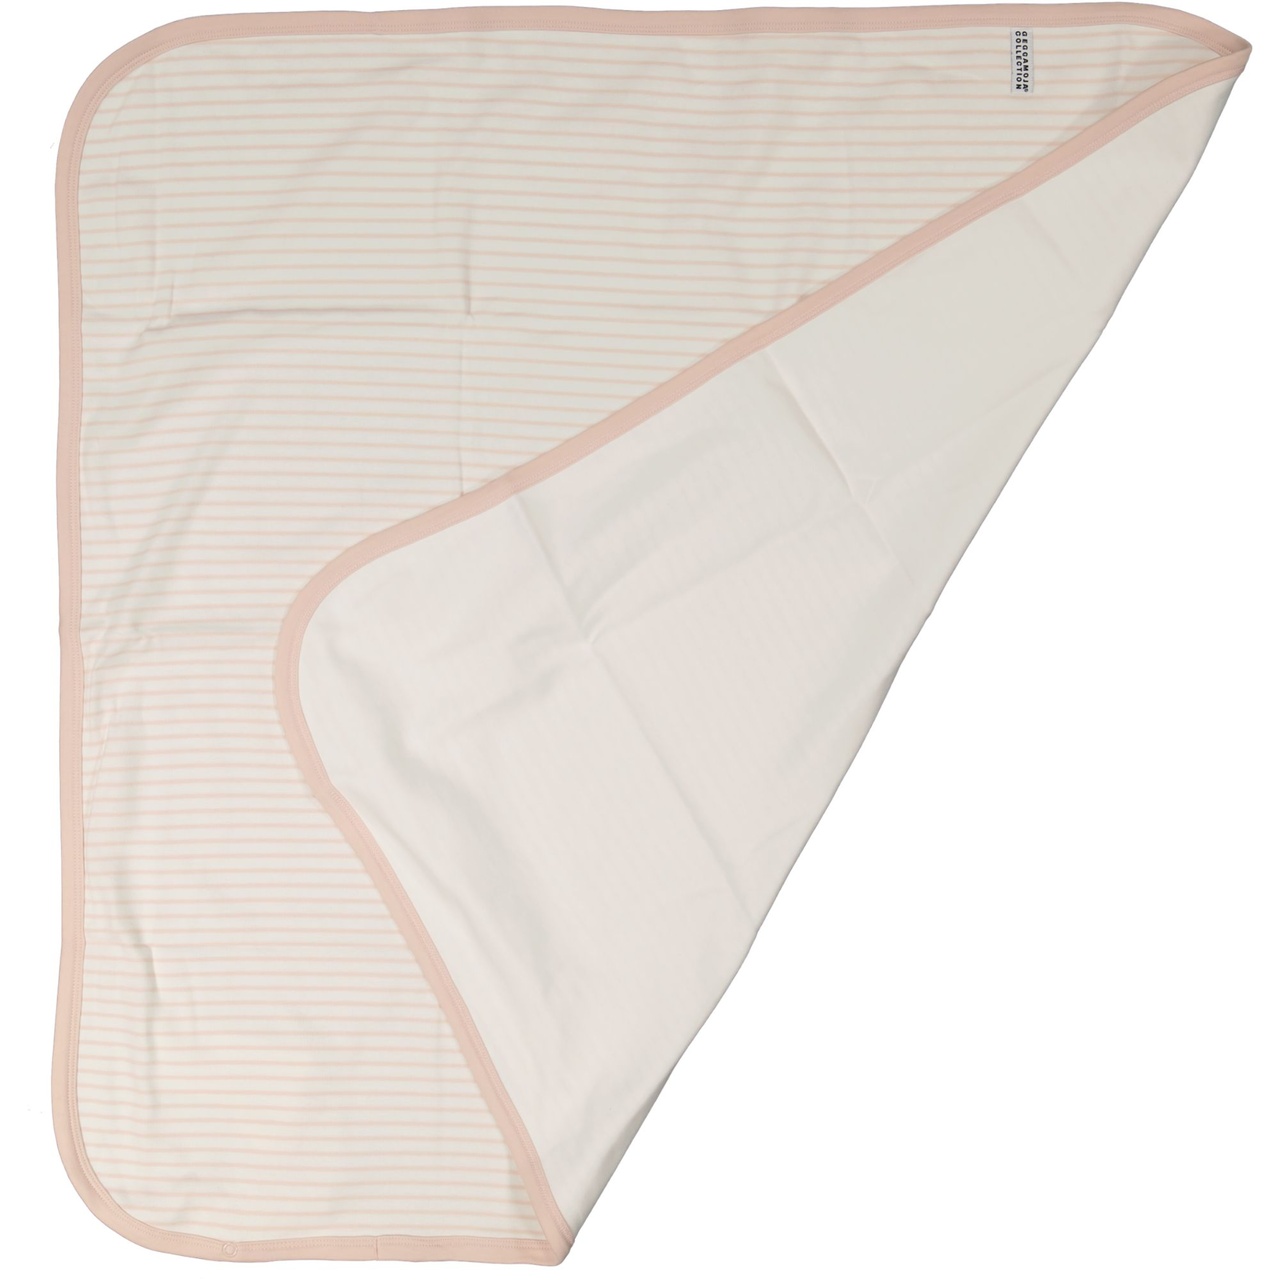 Baby blanket L.pink/offwhite